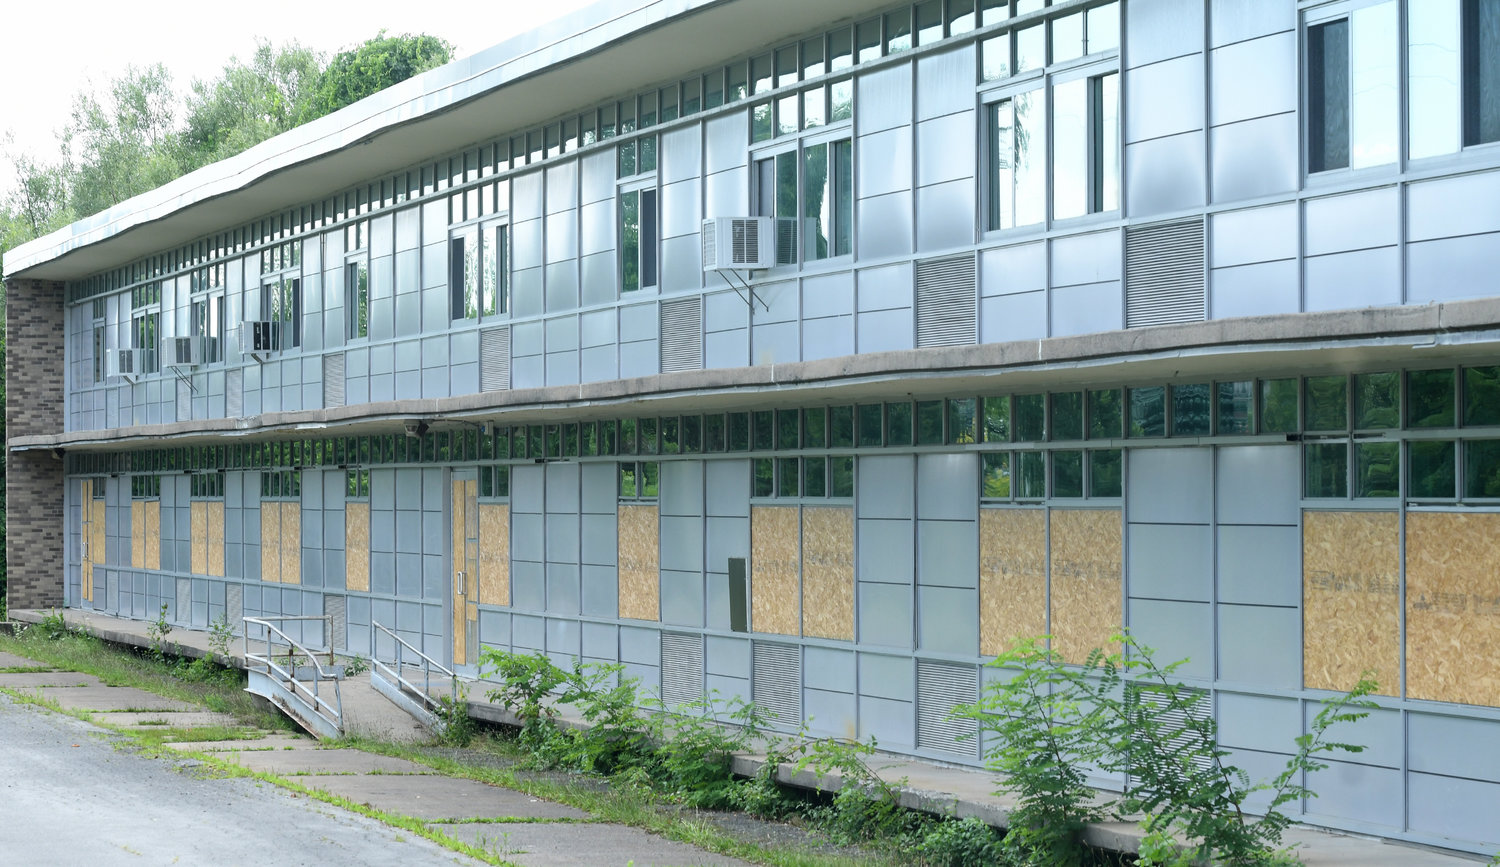 Many windows at Staley Elementary School have been boarded up due to ongoing vandalism, according to the Rome Police Department.